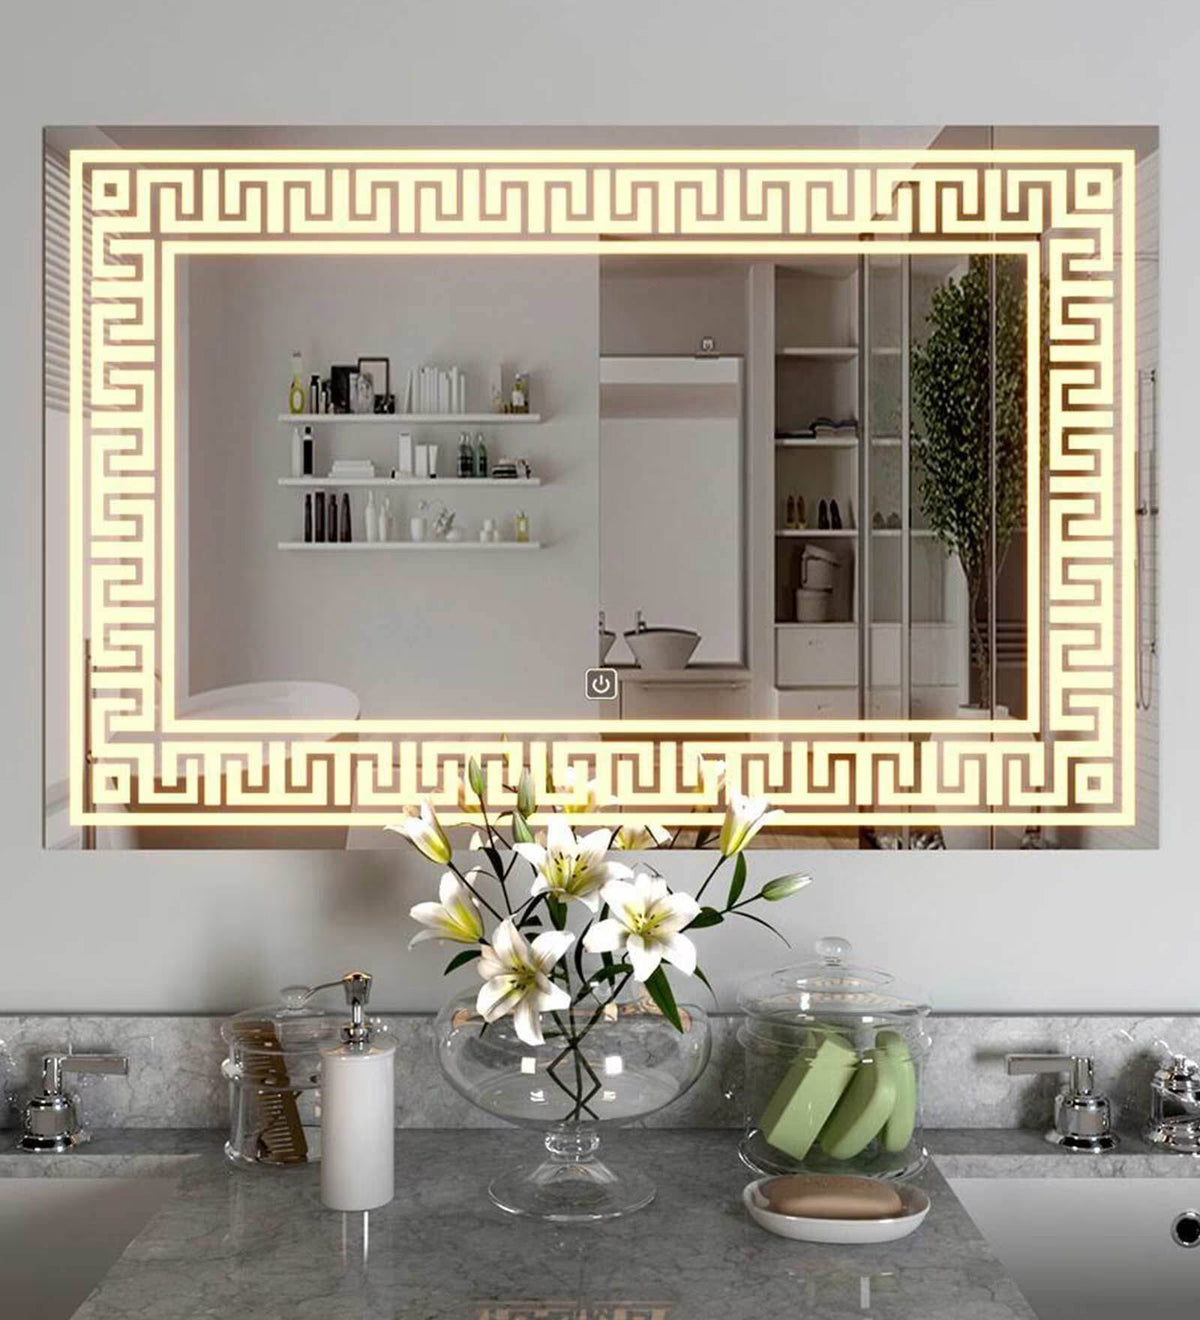 smilesellers Glam Glass LED Wall Mirror With Light-Wall Mounted Backlit- Inch, For Home Office Decor